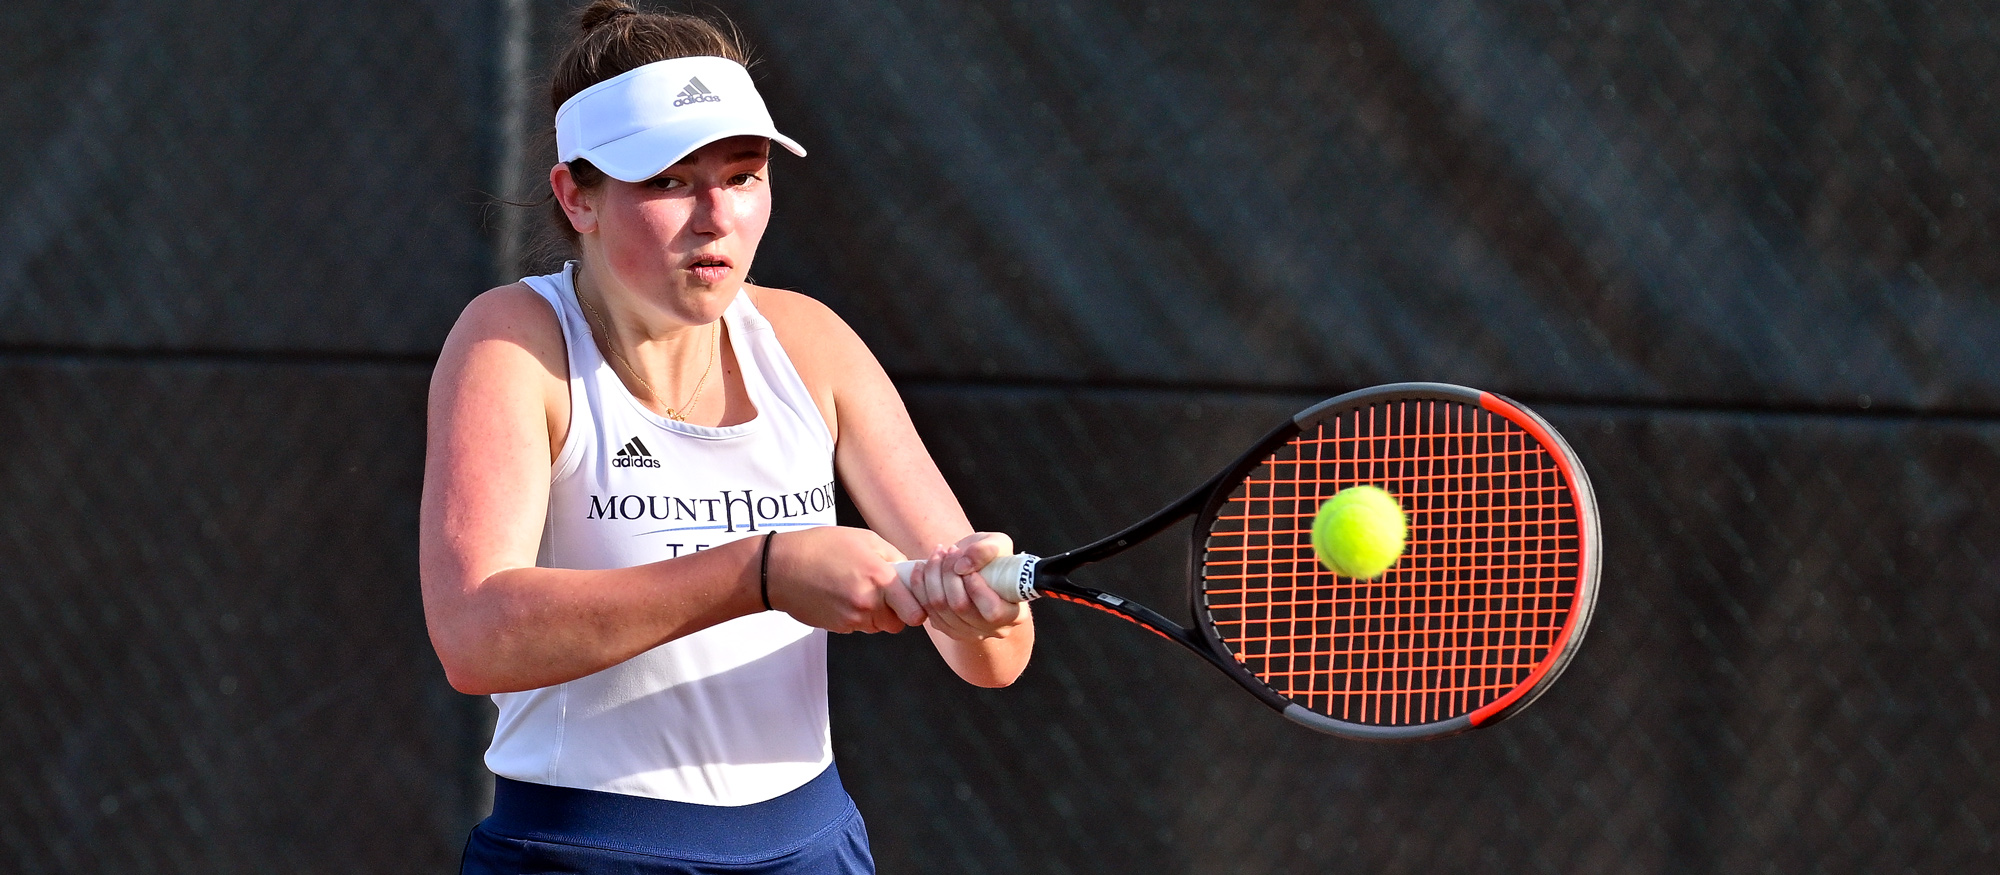 Kate Vavra won at No. 3 doubles and No. 3 singles in Mount Holyoke's 9-0 victory at Simmons on April 21, 2023. (RJB Sports file photo)